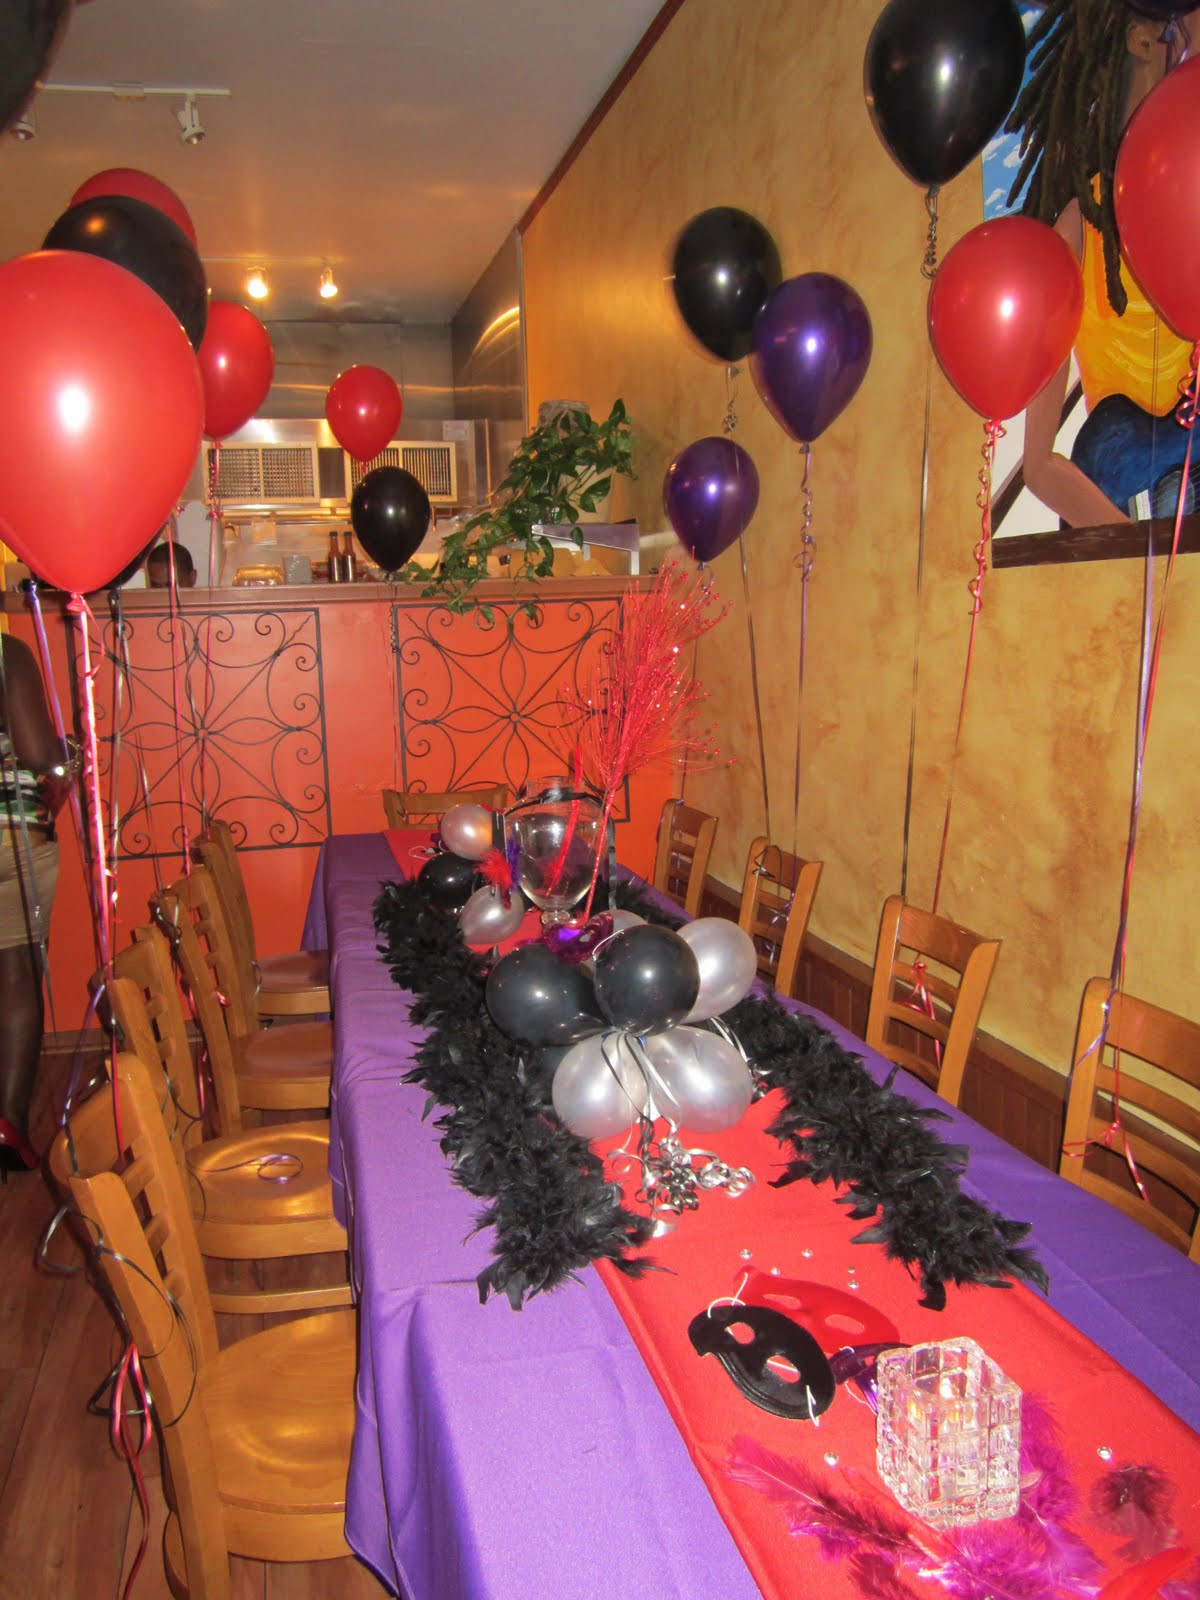 Dinner Birthday Party Ideas
 How To Decorate a Birthday Dinner Red Purple & Black